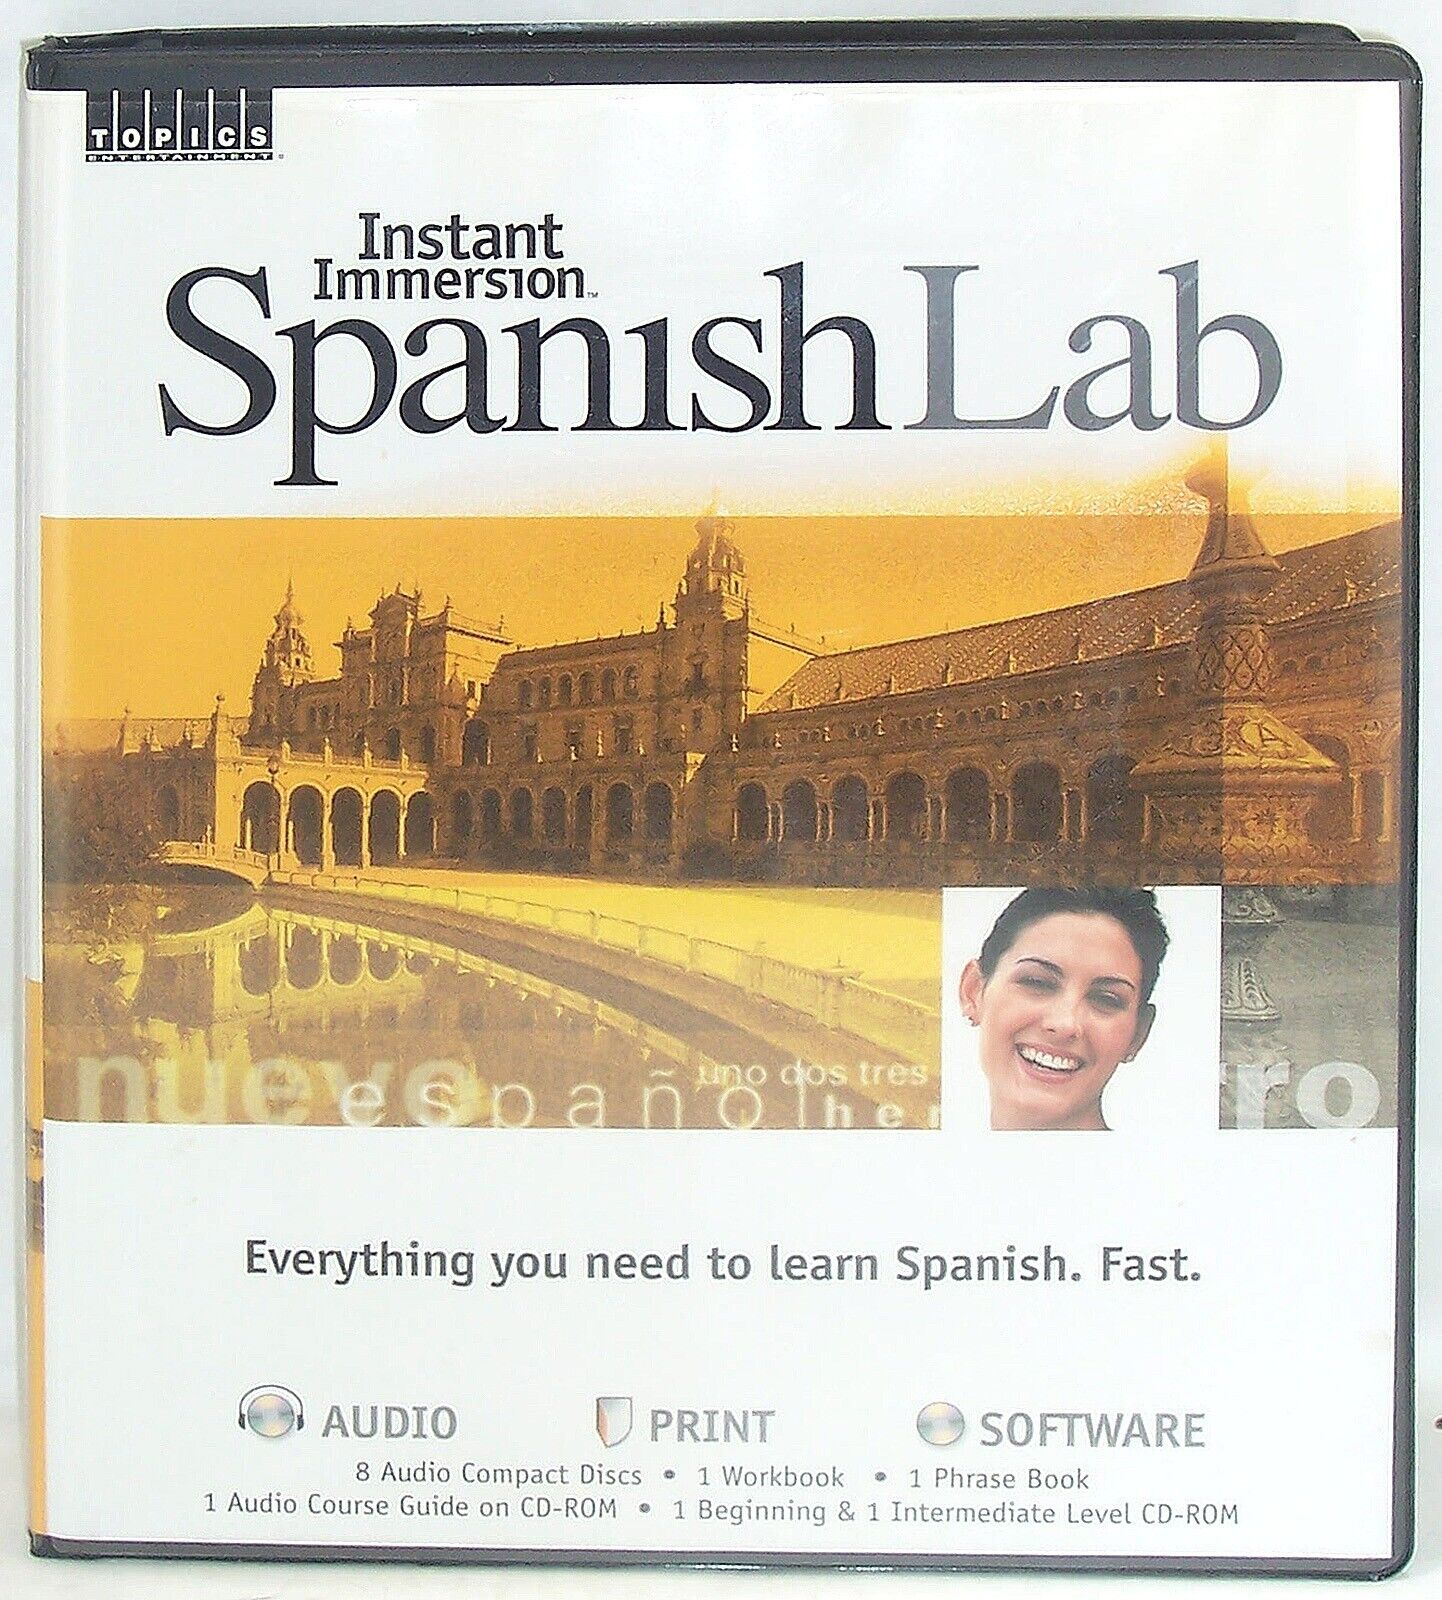 Topics Instant Immersion Spanish Lab, 8 CDs, Workbook, Phrase Book, Course Guide